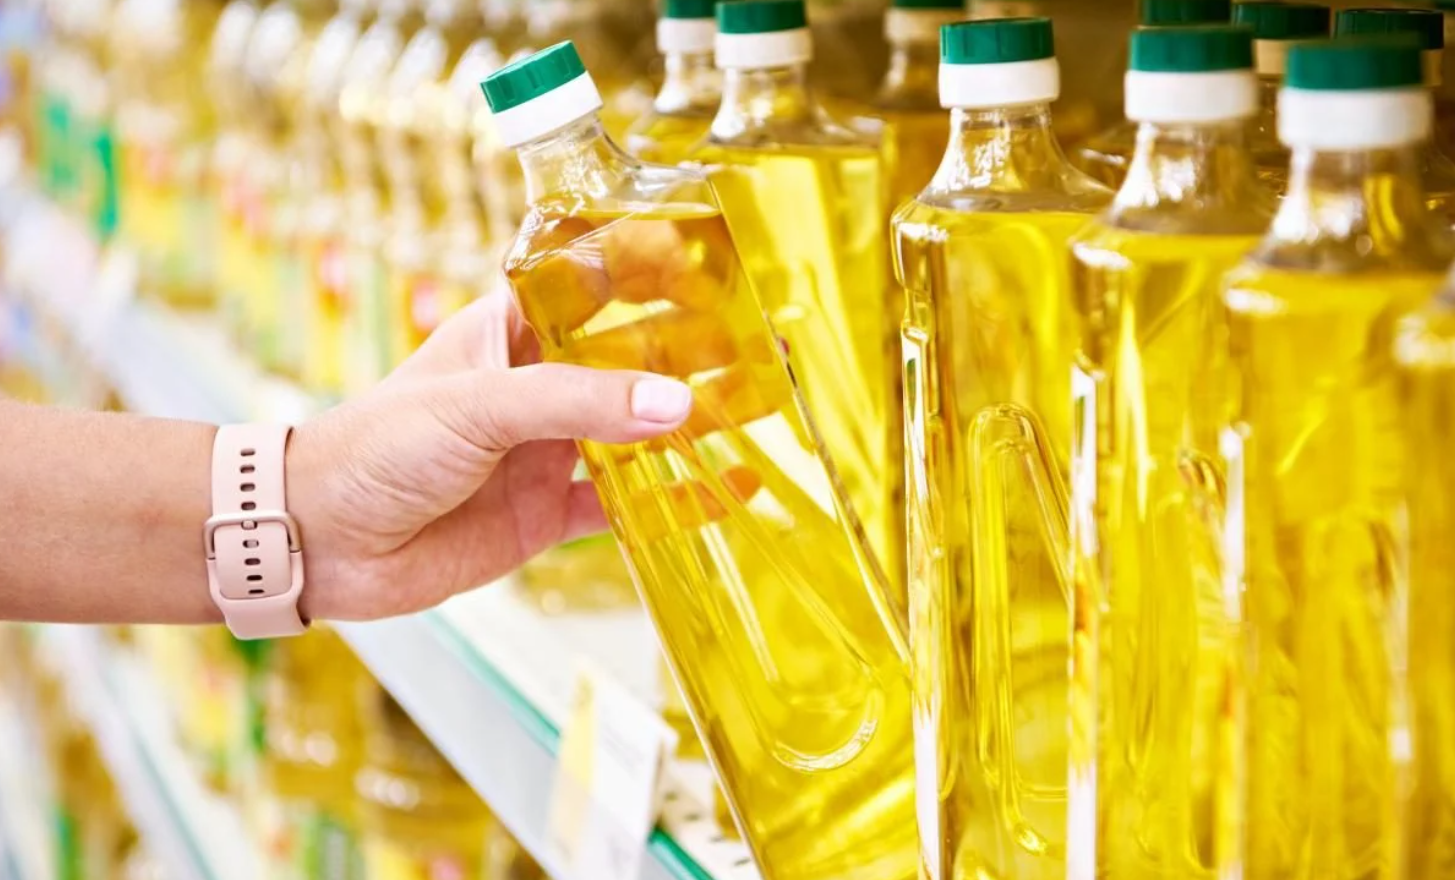 How to check vegetable oil for fakes